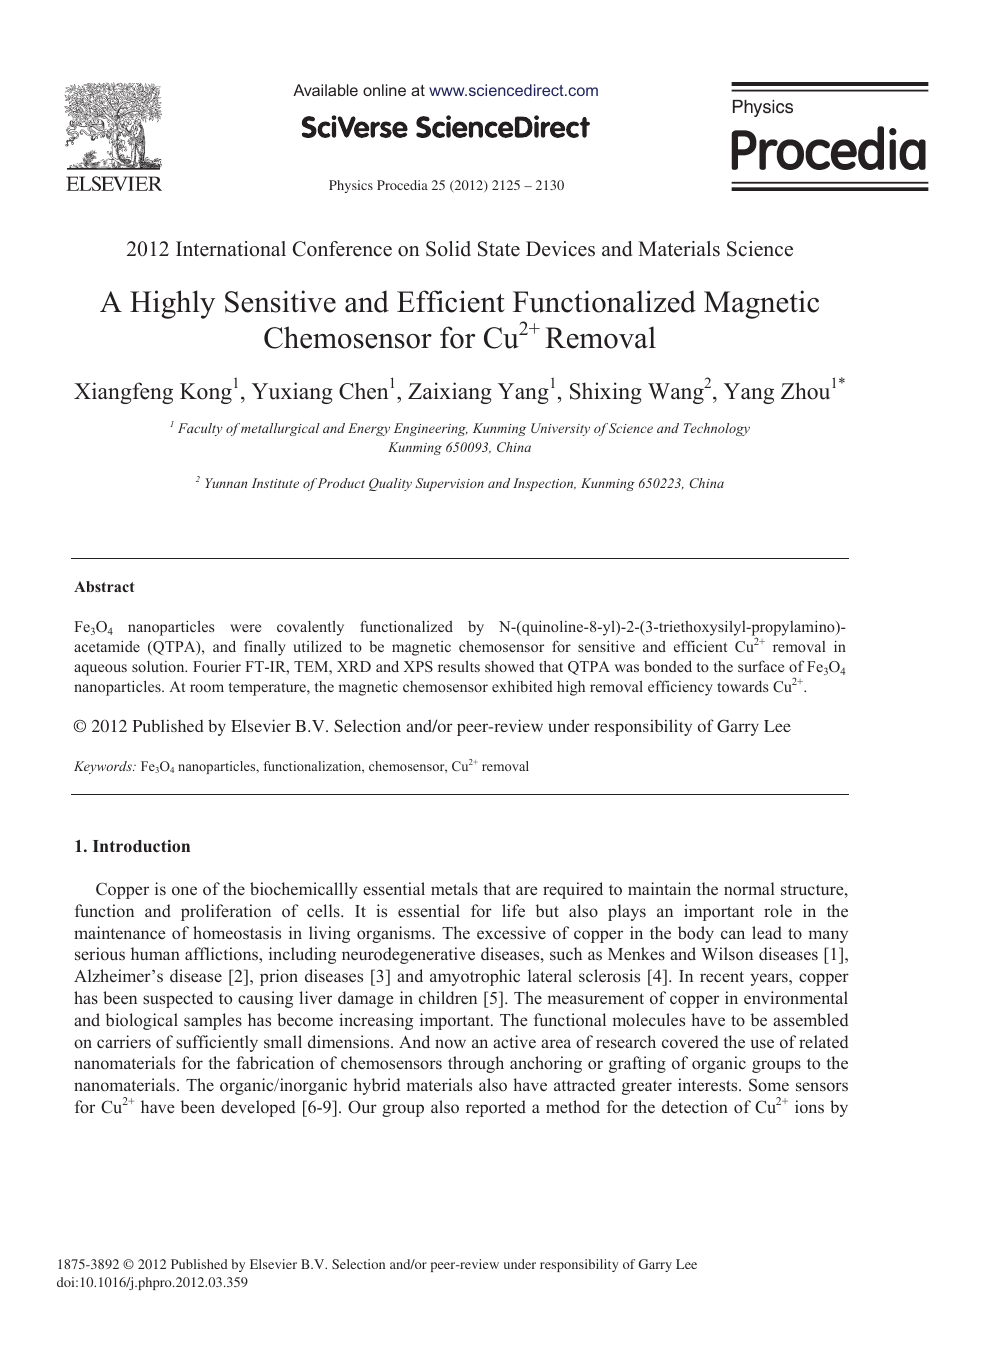 A Highly Sensitive And Efficient Functionalized Magnetic Chemosensor For Cu2 Removal Topic Of Research Paper In Materials Engineering Download Scholarly Article Pdf And Read For Free On Cyberleninka Open Science Hub